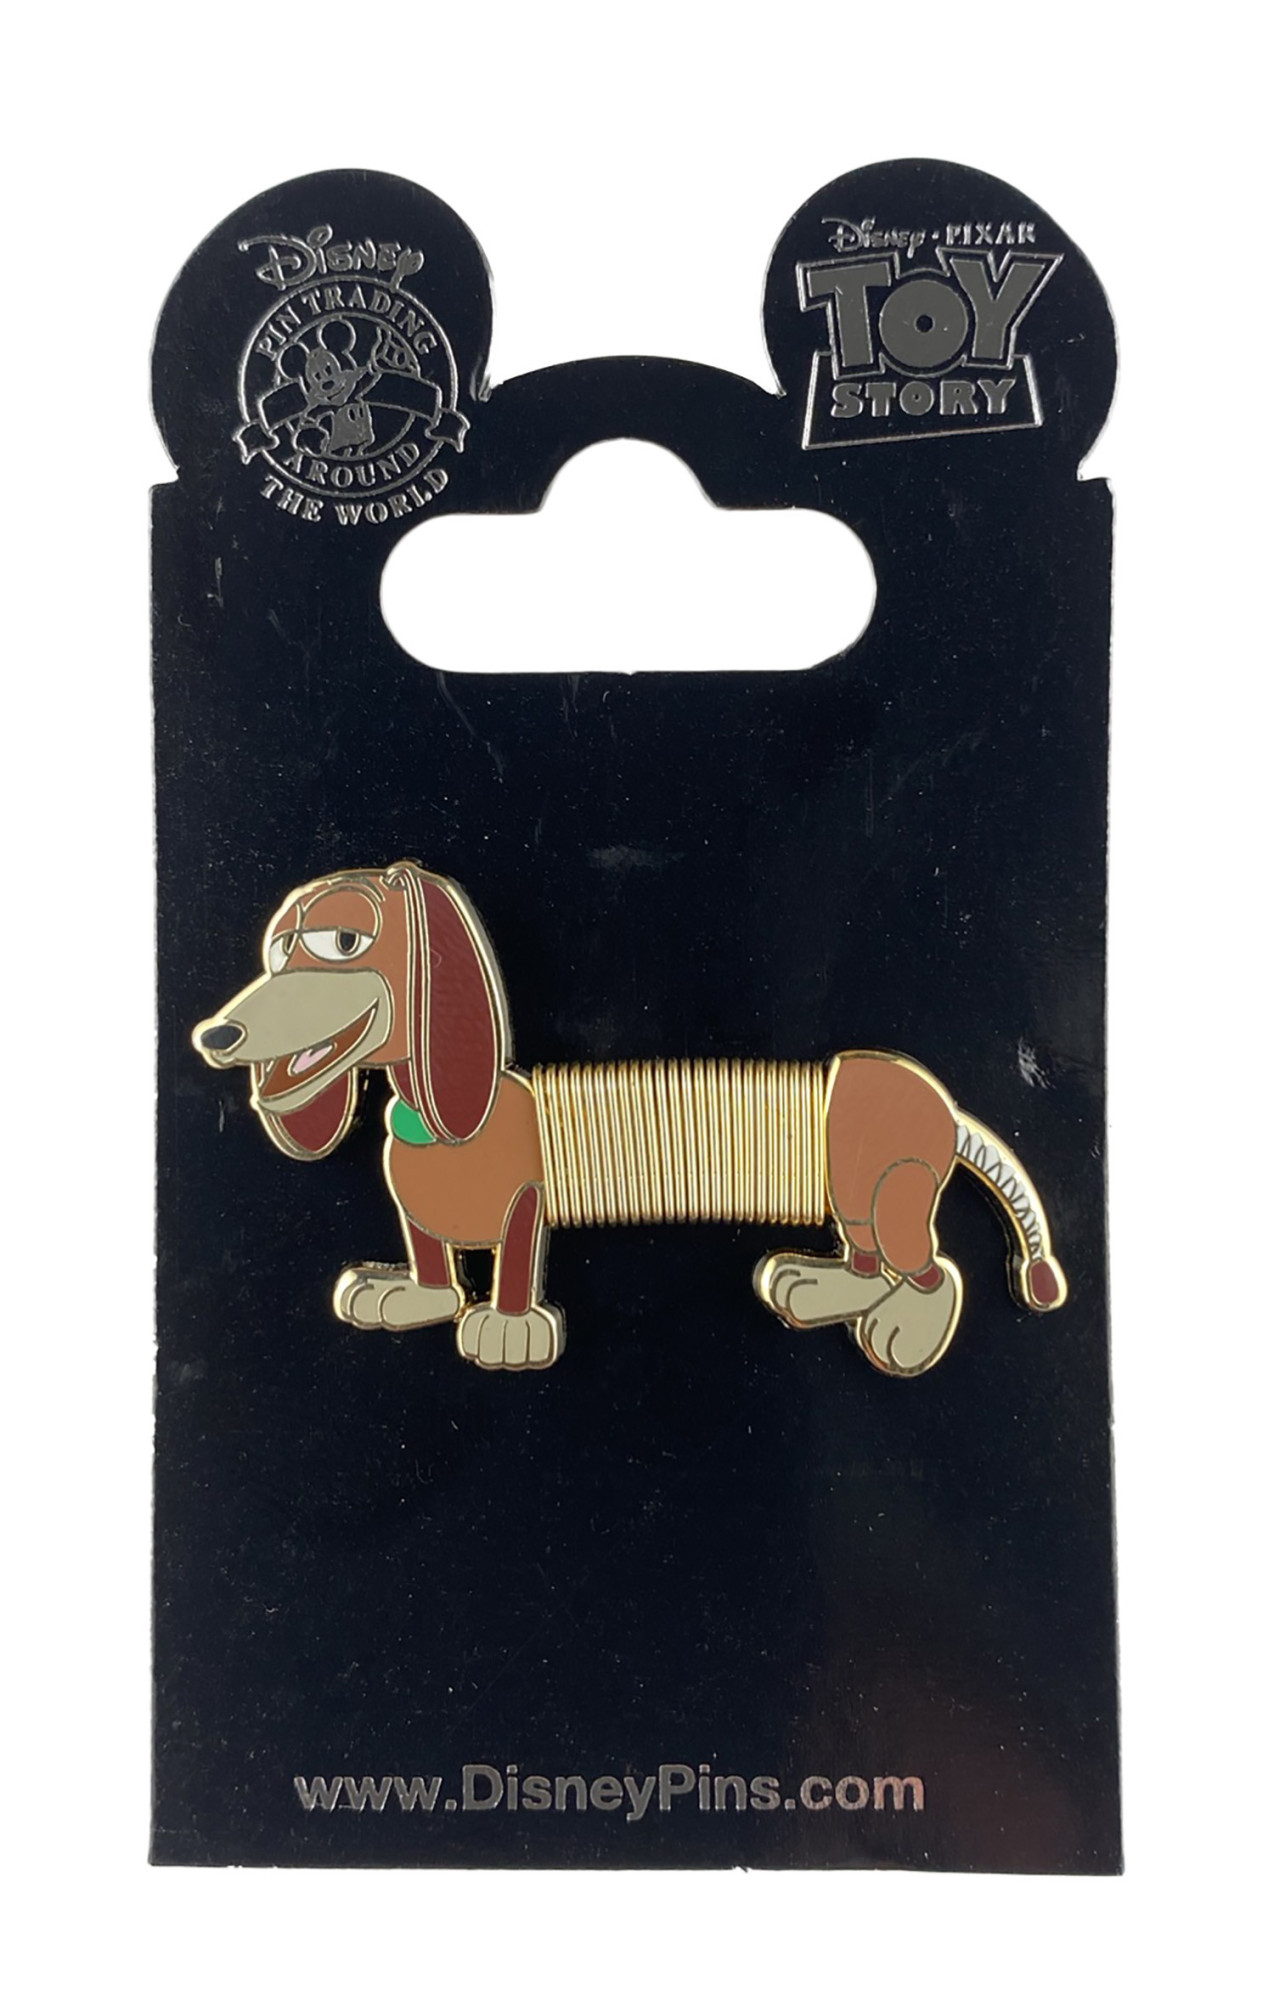 products Disney Pin - Slinky Dog - Toy Story - Metal Coils for Stomach - Pixar